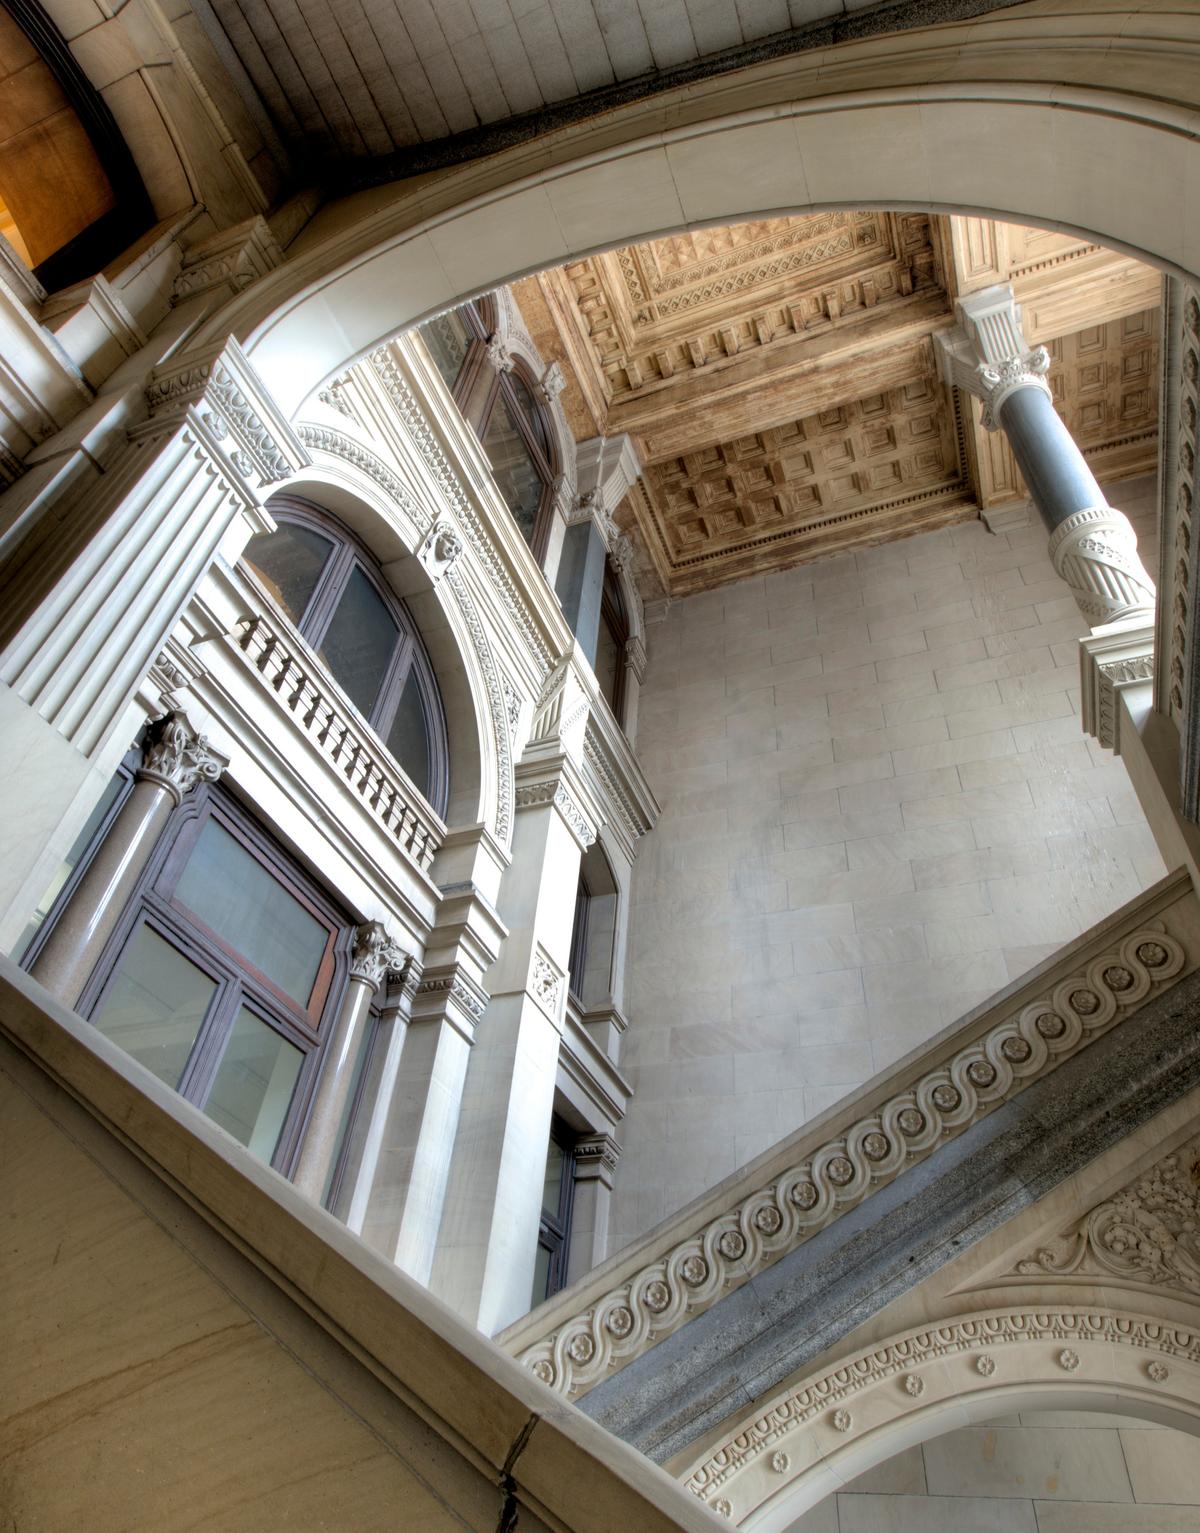 This portal stairwell is made of limestone walls, with granite for the steps, columns, and base, and limestone for the heavy carved railings. The stairwell provides access to the upper levels while allowing natural light to penetrate deep into the building. (Bestbudbrian/CC BY-SA 3.0)